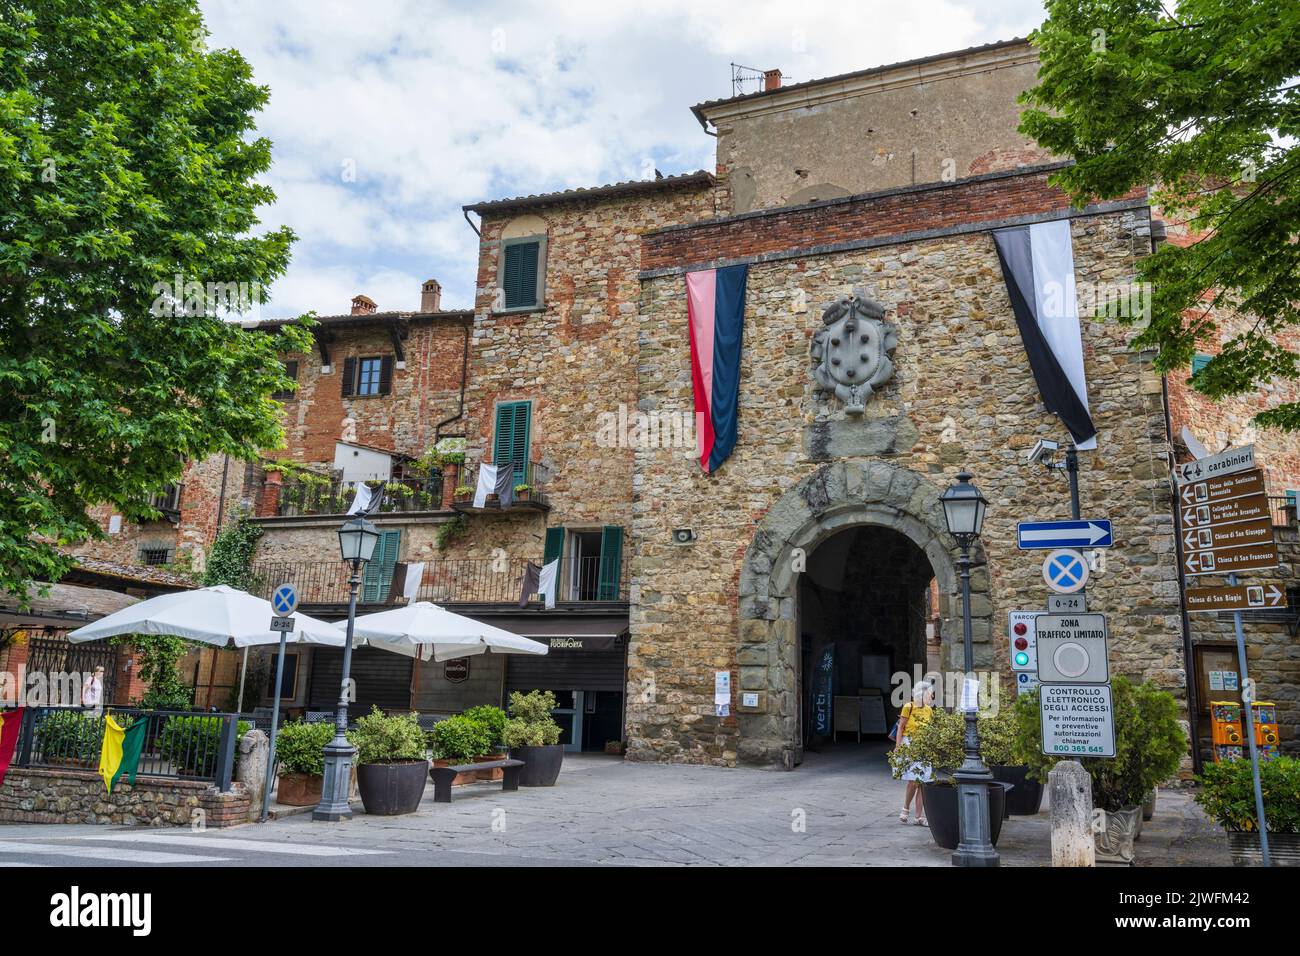 Exterior of Porta San Giusto in the medieval hilltop town of Lucignano in the Val di Chiana in Tuscany, Italy Stock Photo